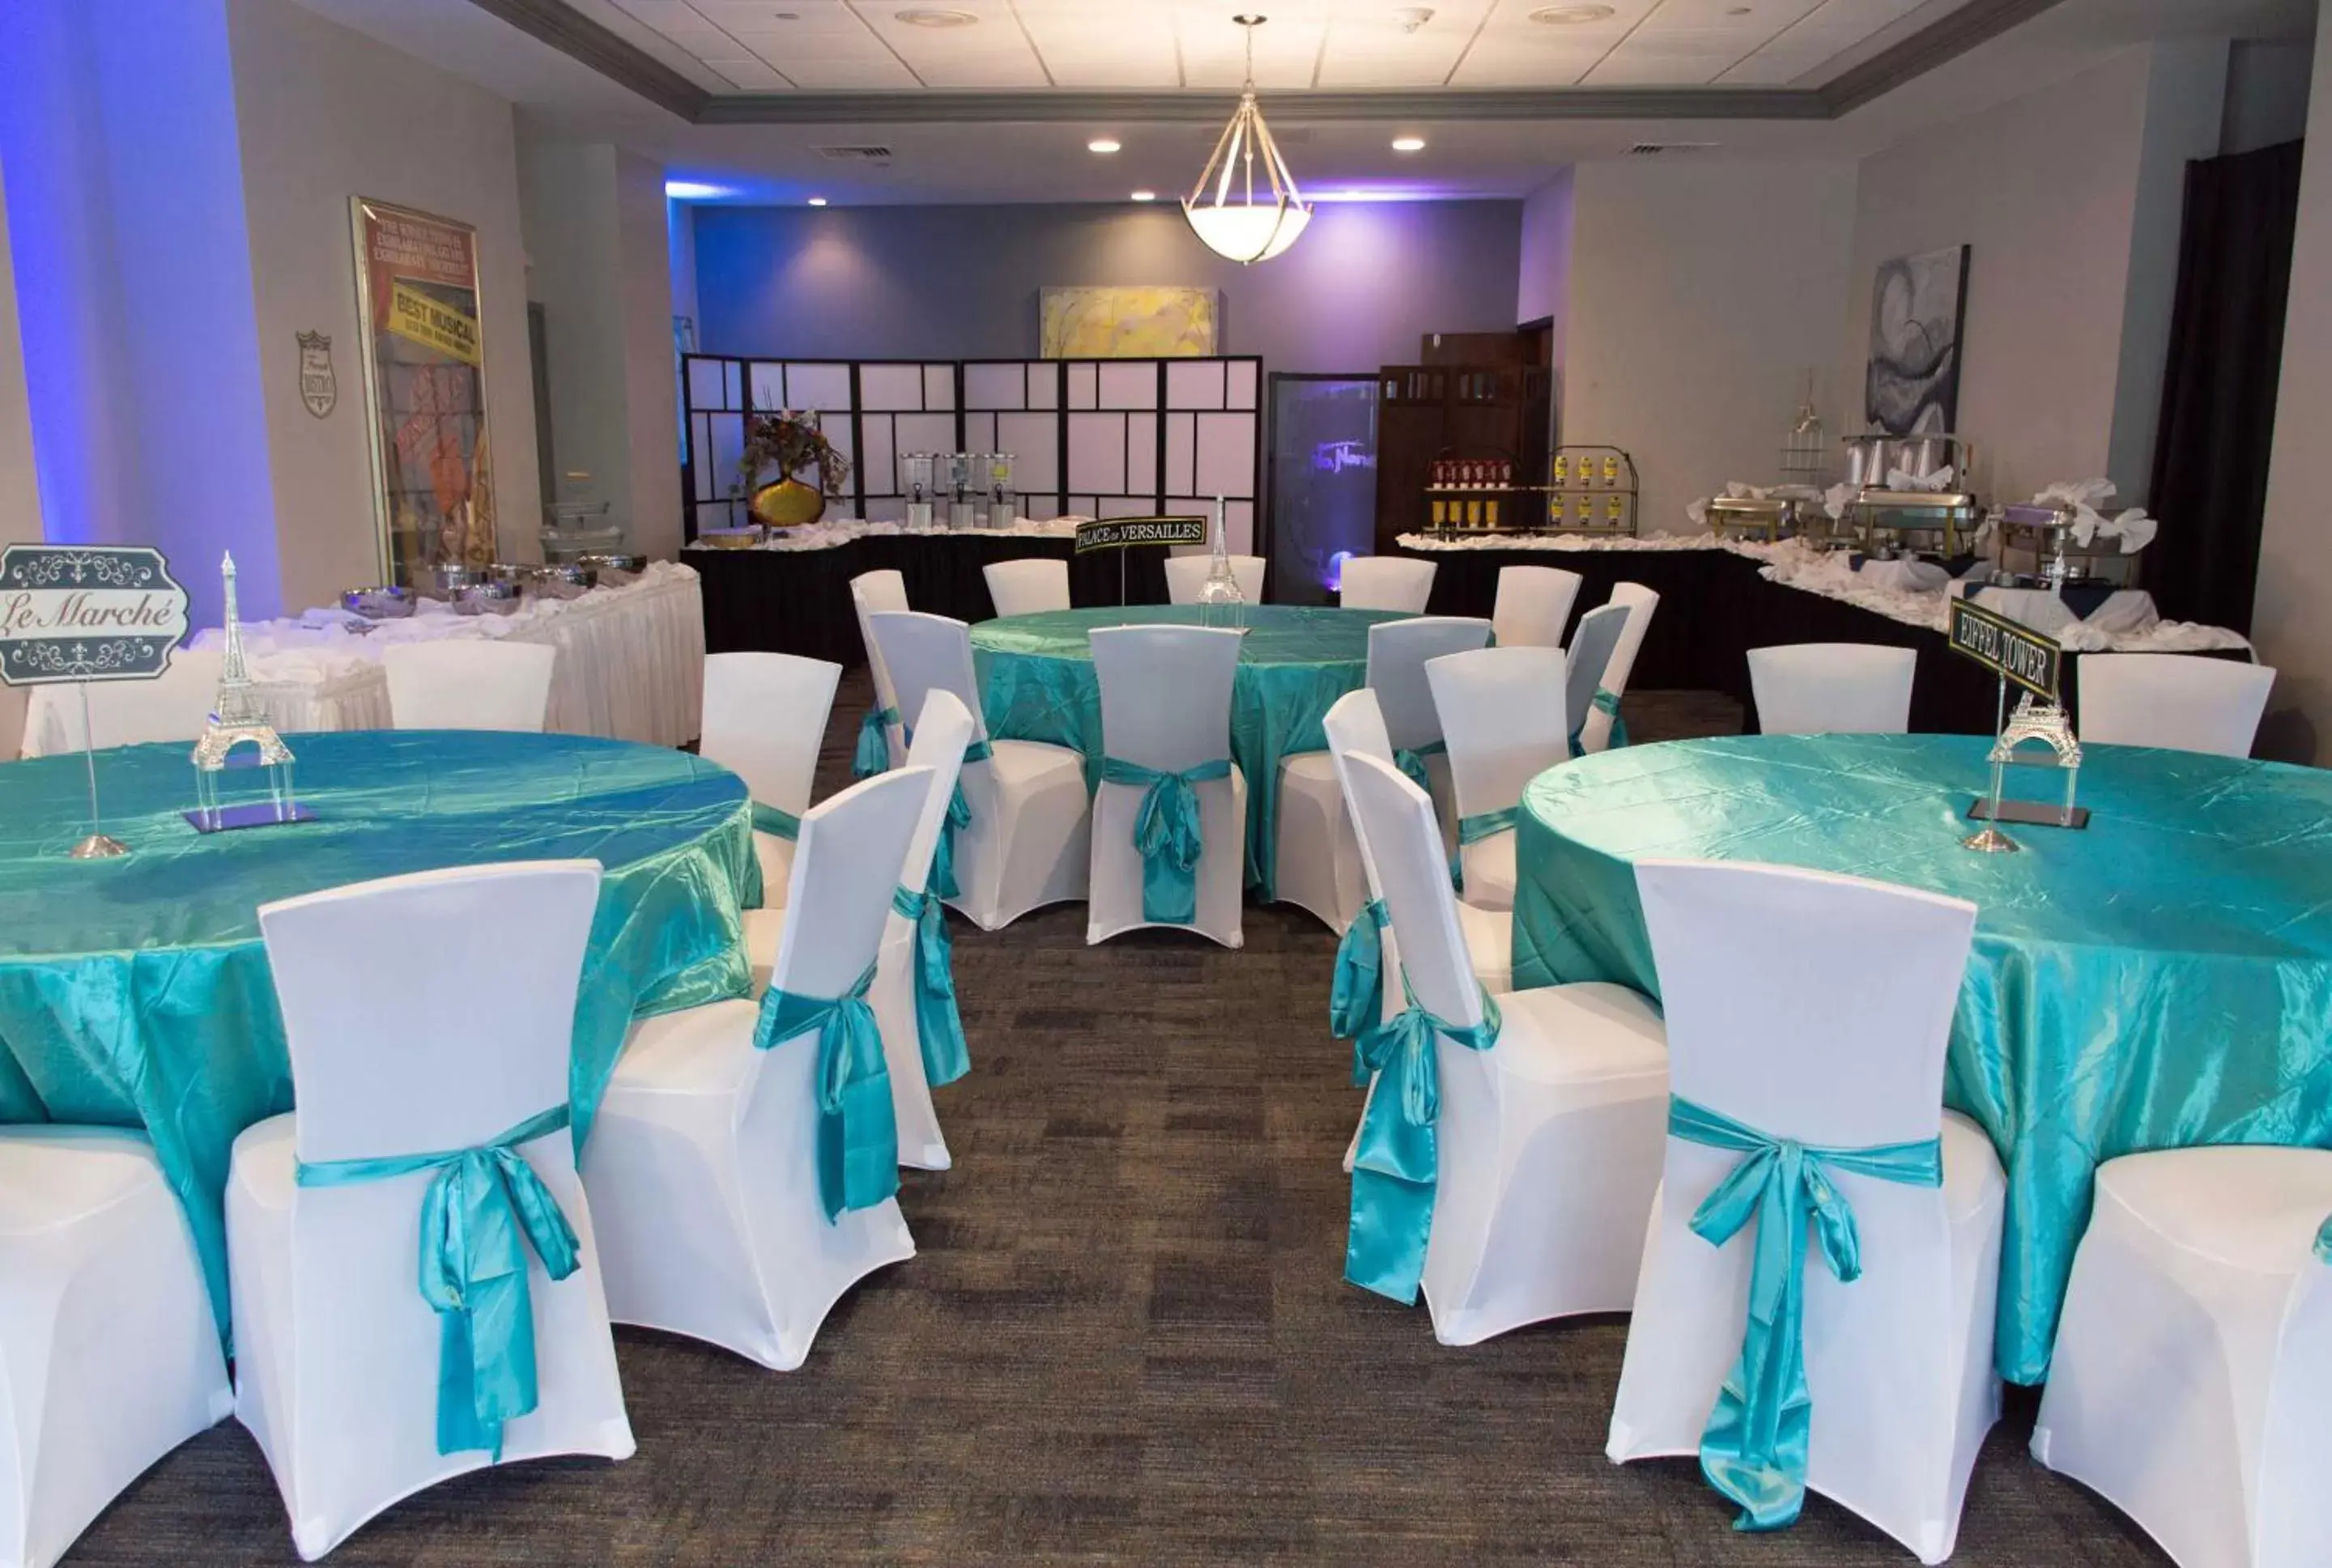 Banquet/Function facilities, Banquet Facilities in The Barrymore Hotel Tampa Riverwalk